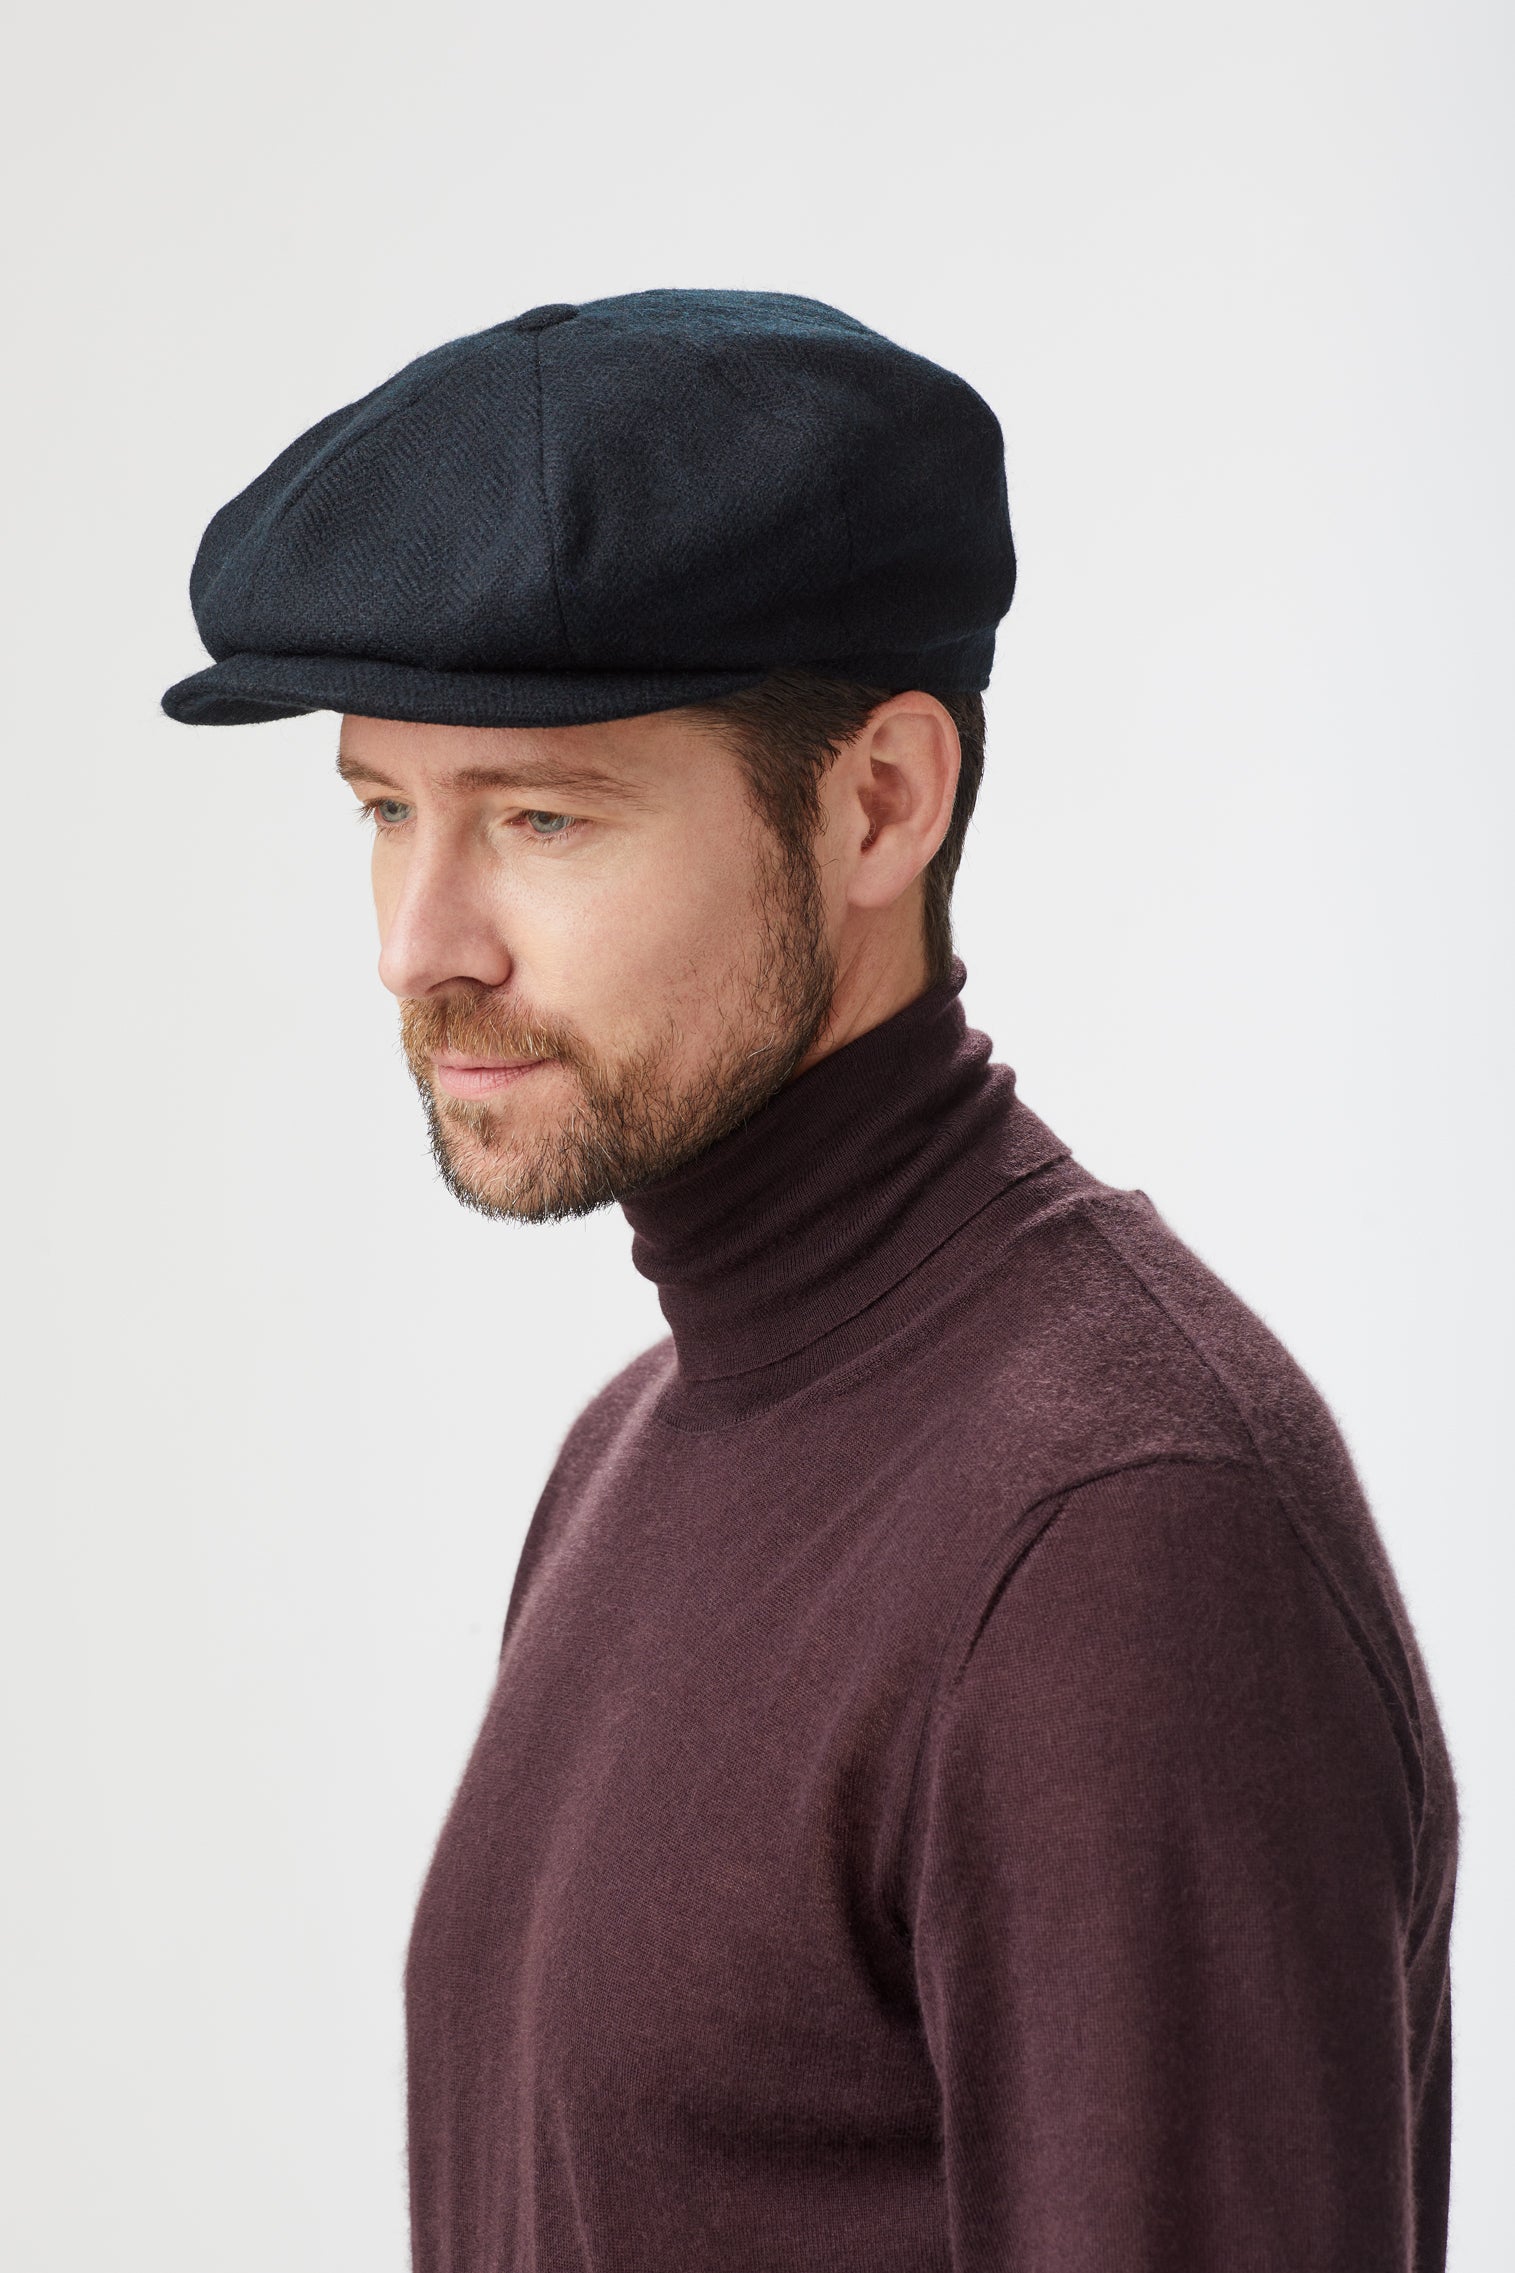 Tremelo Black Bakerboy Cap - Hats for Tall People - Lock & Co. Hatters London UK